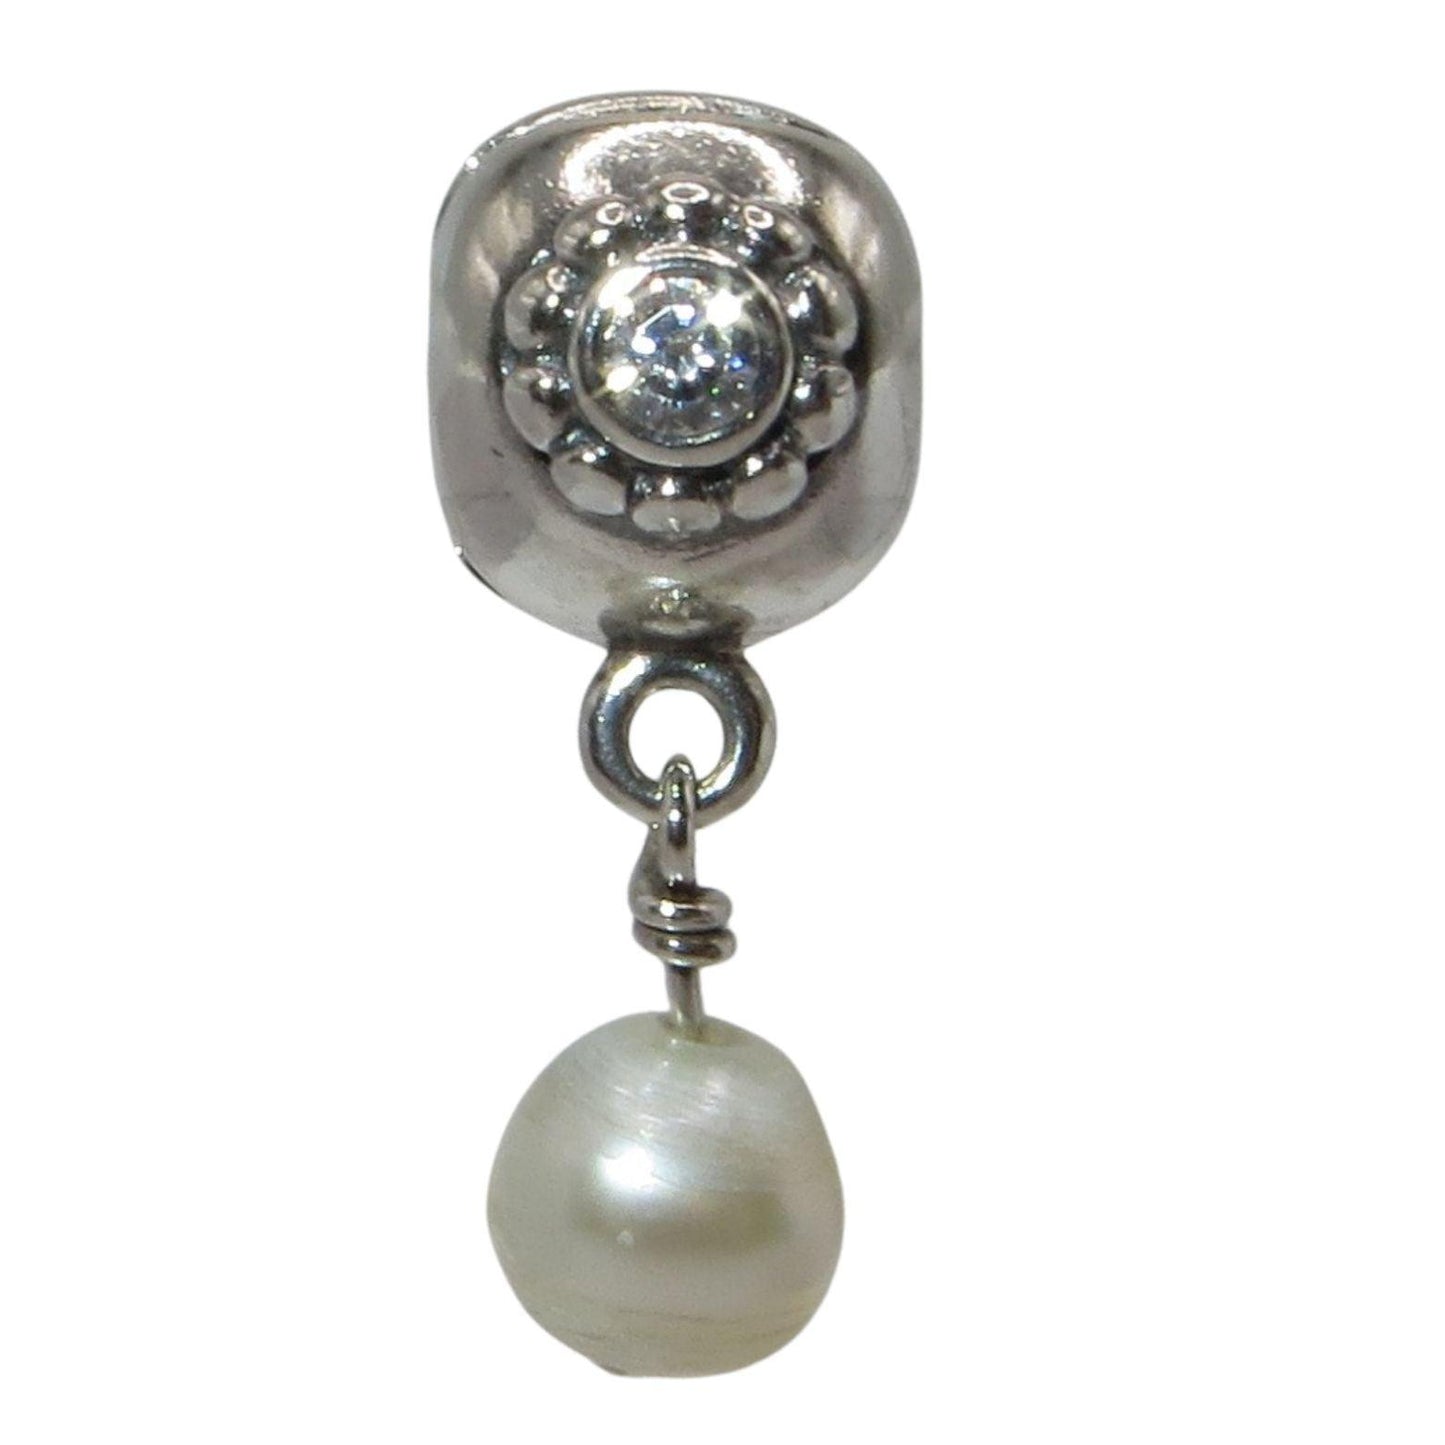 Pandora-790873P-Woman's Charm-White Pearl of Wisdom Clip Sterling Silver Clip with a White Pearl and Clear CZ